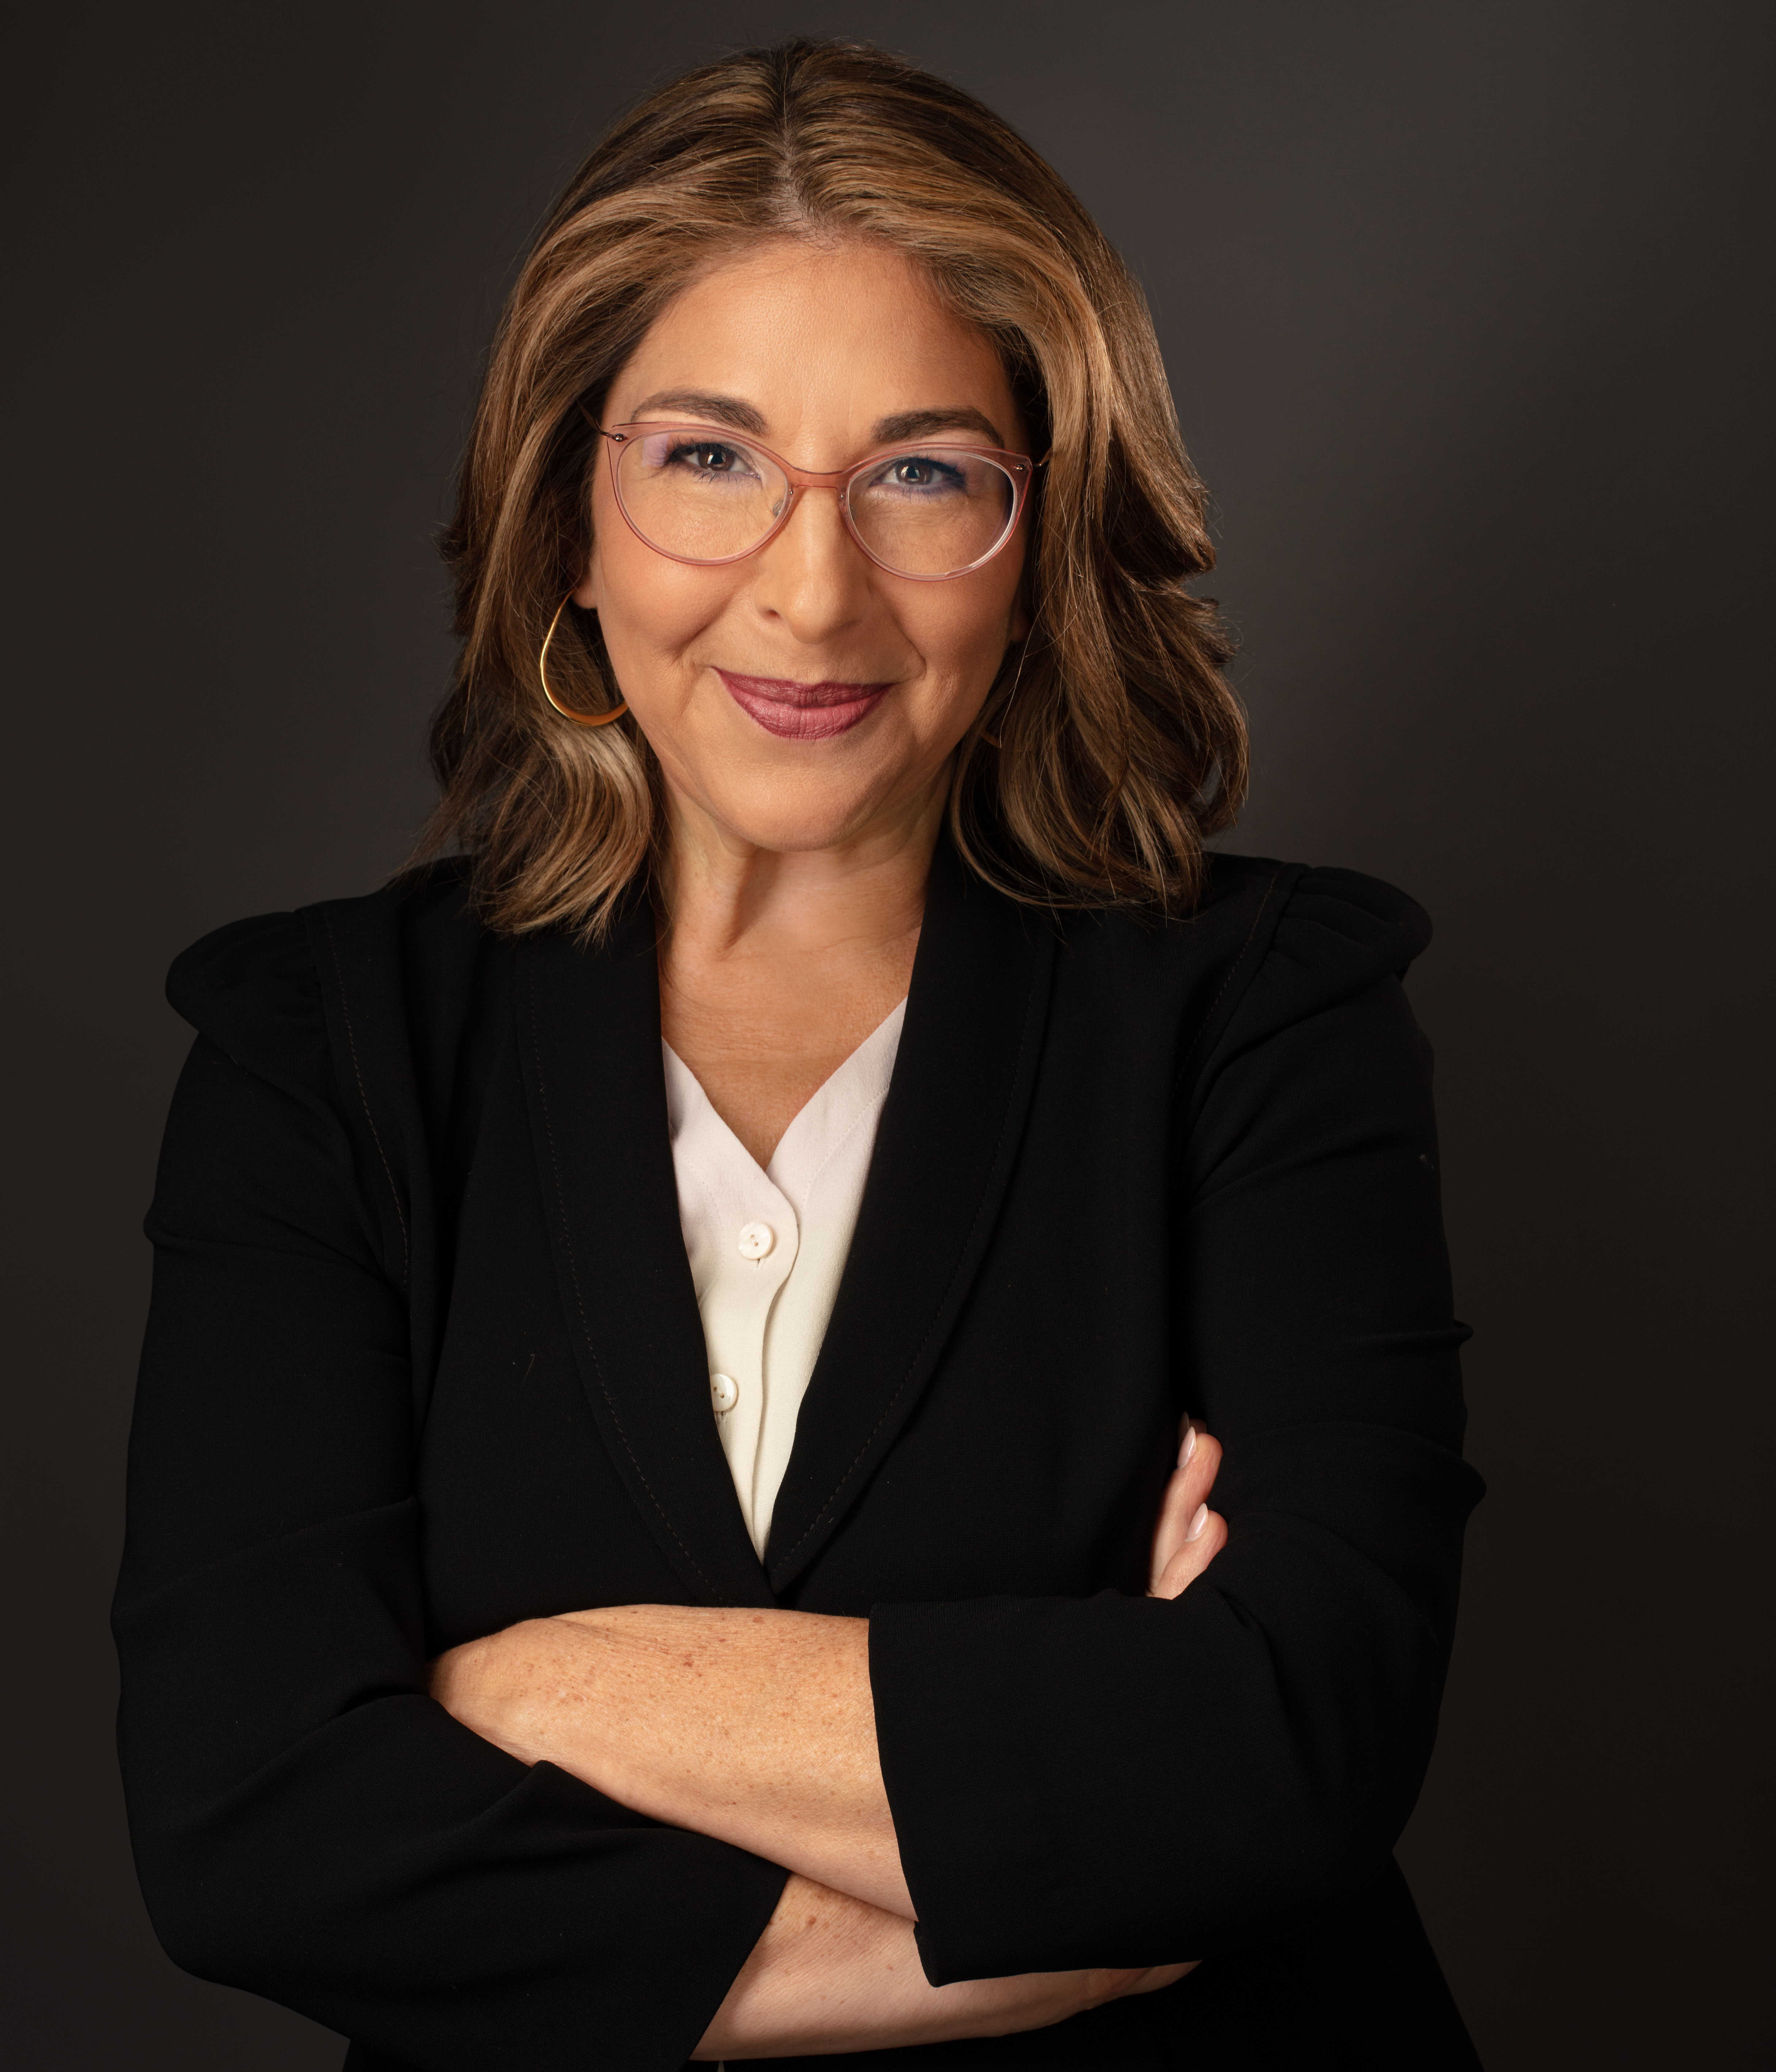 Naomi is a white woman with shoulder length brown hair and blonde hair. She is smiling at the camera with her arms folded. She wears glasses, a white shirt and a dark blazer.